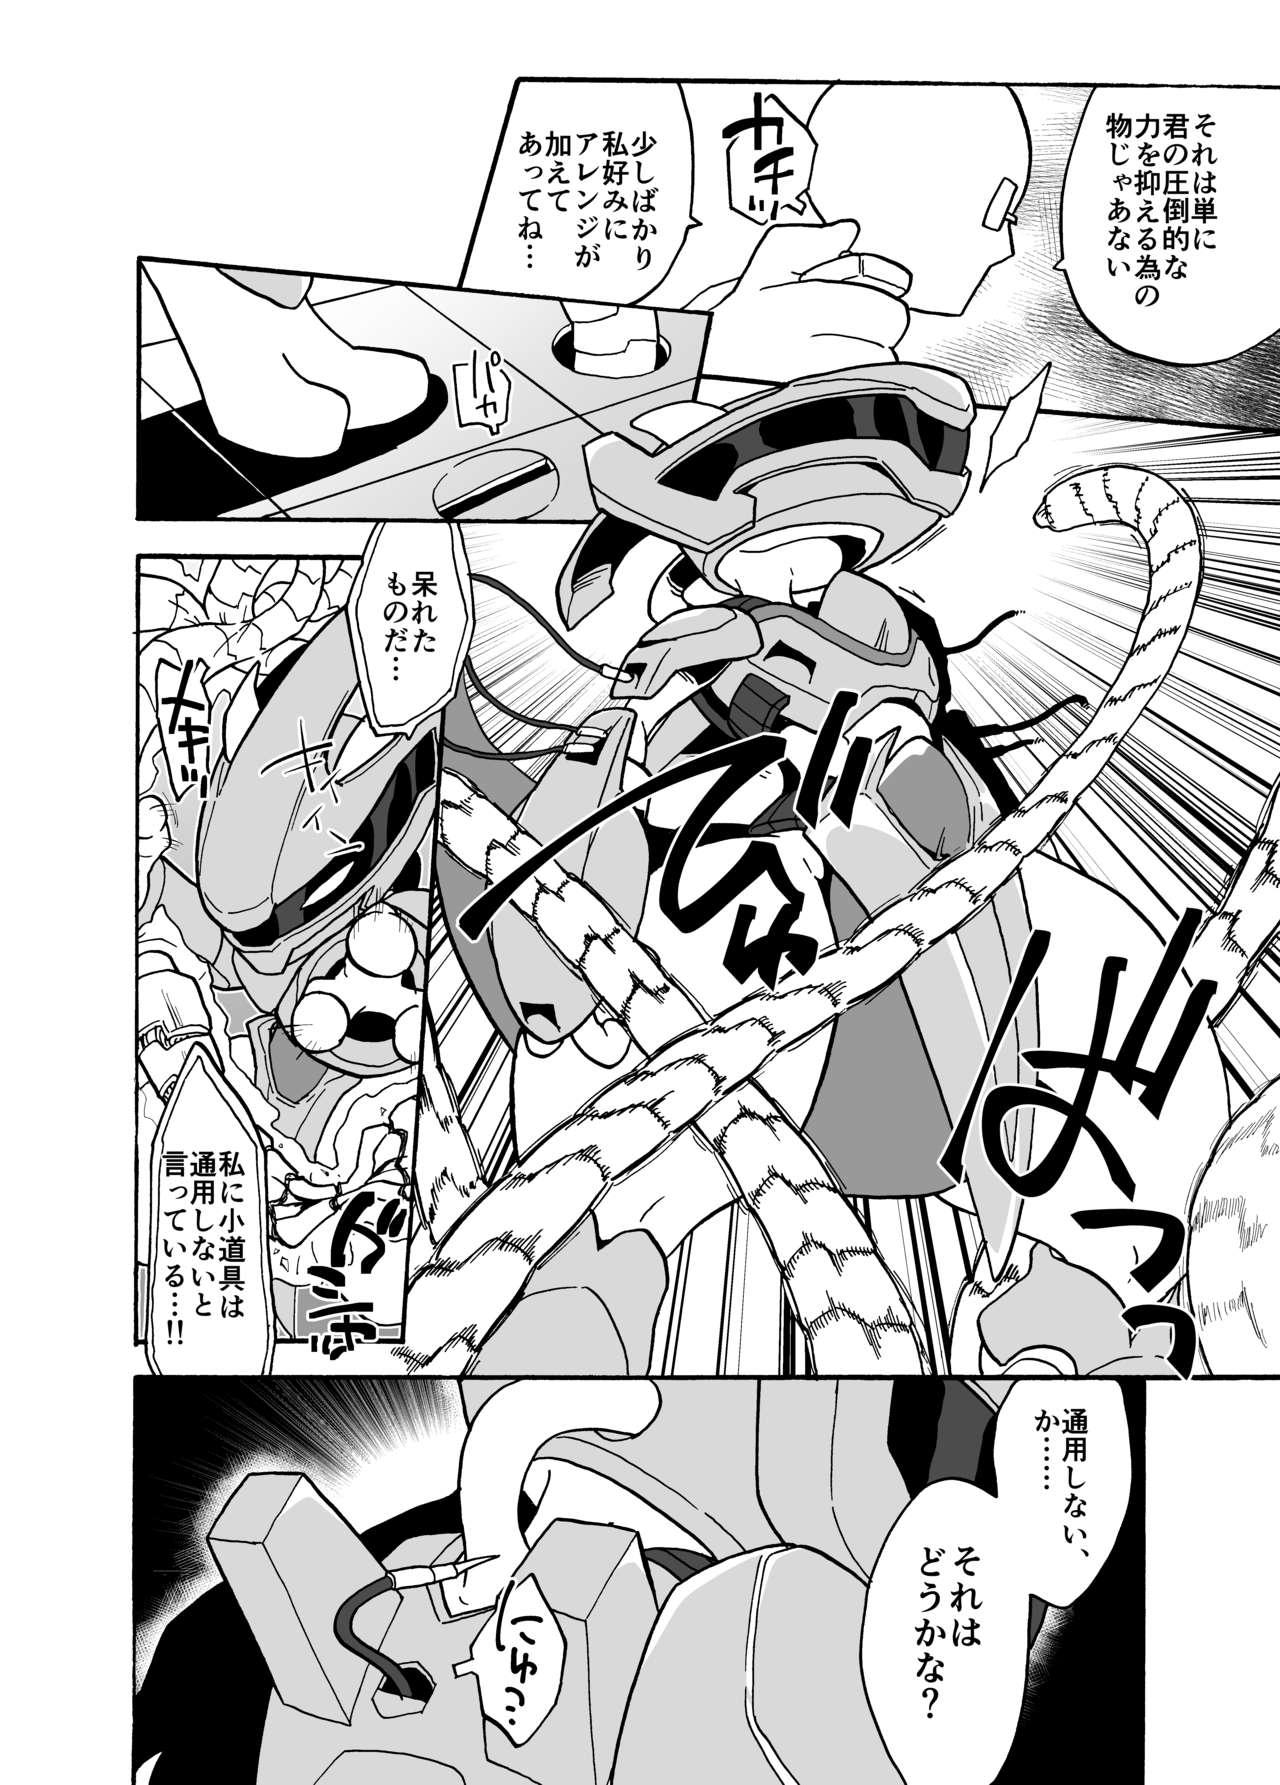 Babes Mewtwo - Pokemon | pocket monsters Teacher - Page 2